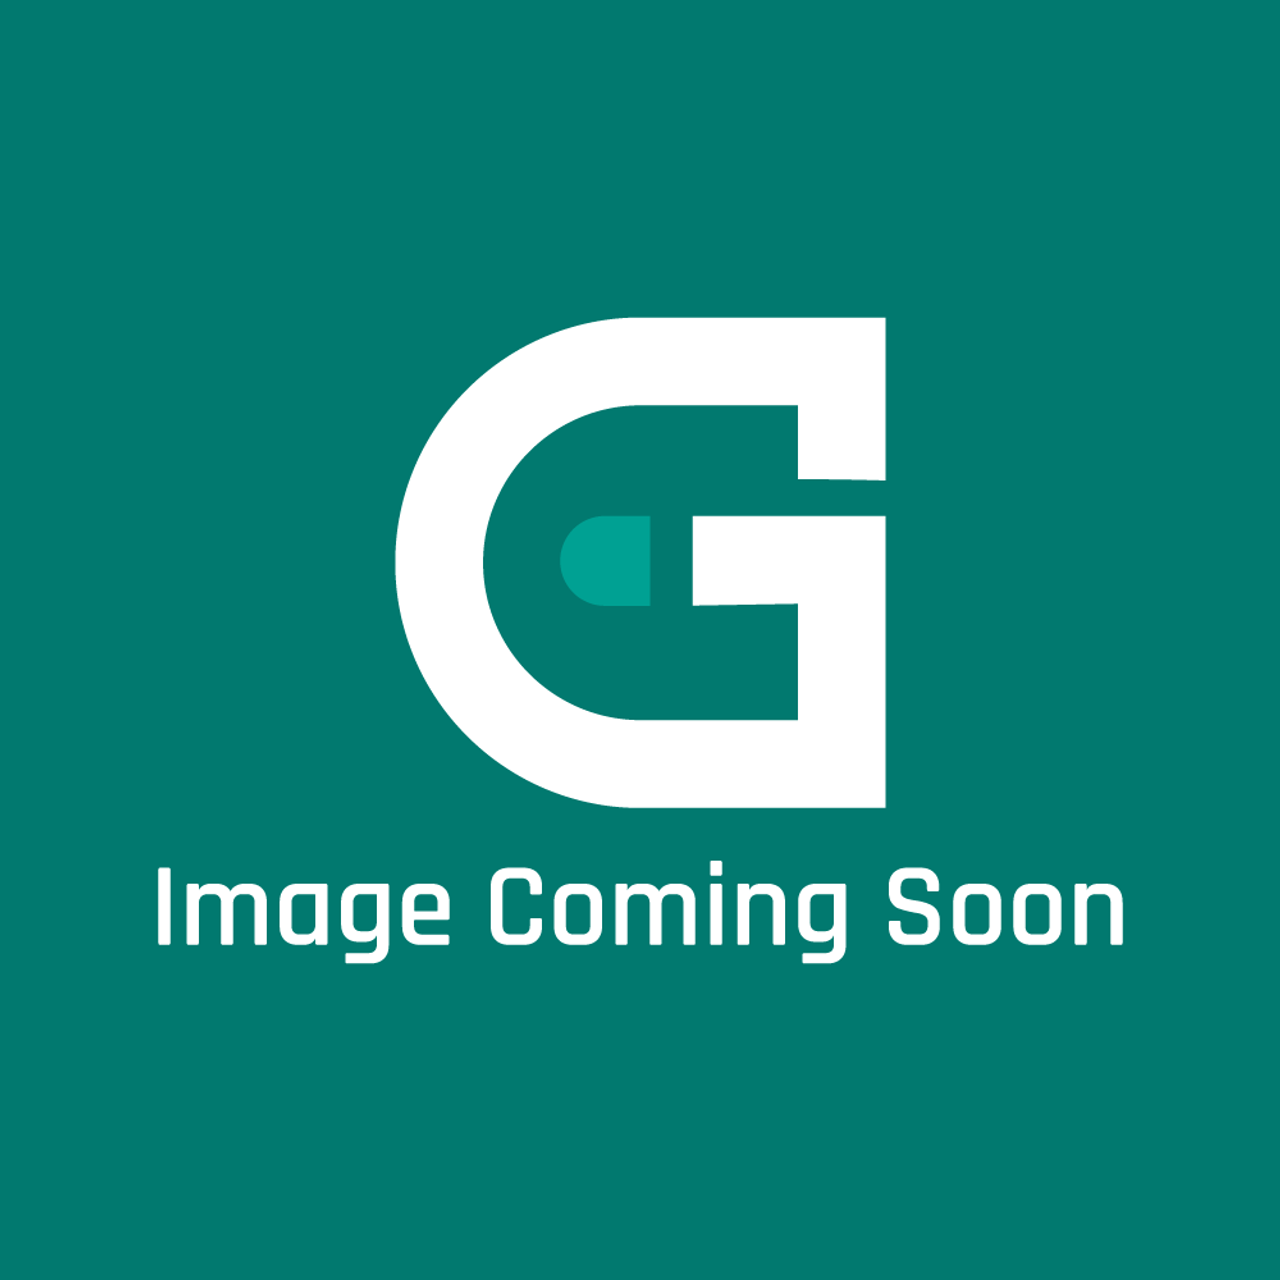 GE Appliances WB56X27480 - WINDOW PACK ASM - Image Coming Soon!